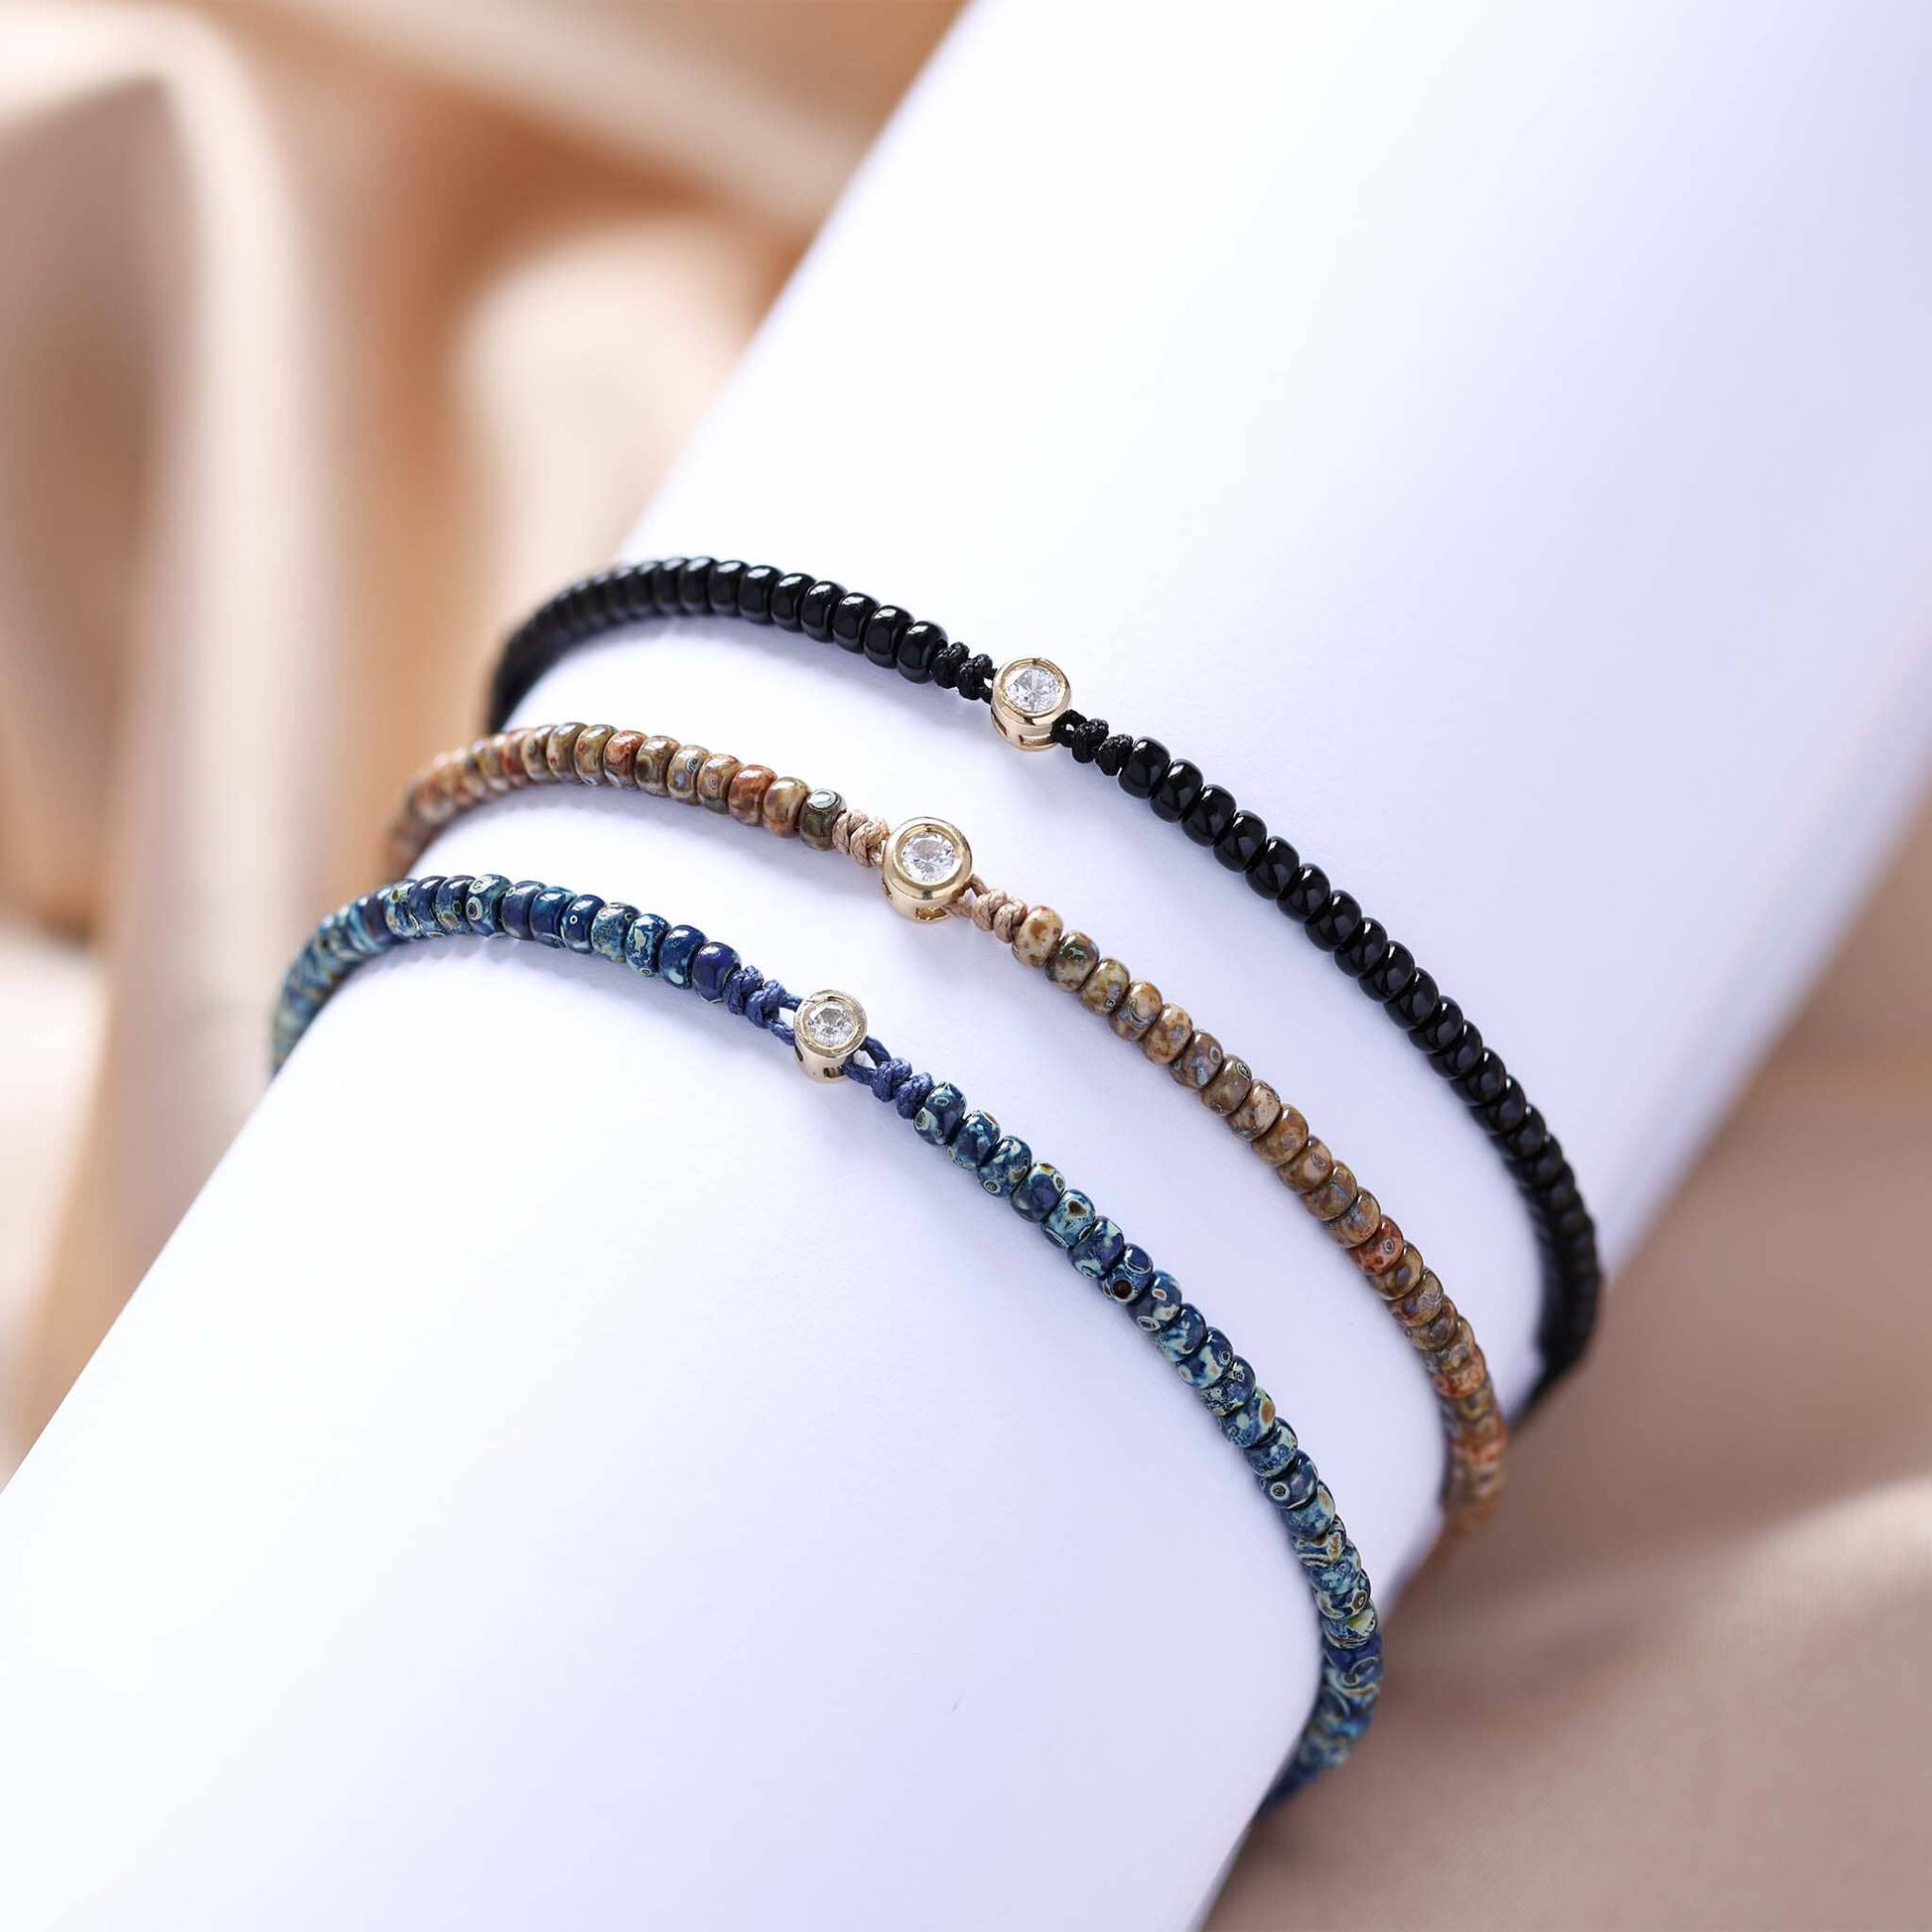 Dyed Blue Beads String Of Love - 14K Yellow Gold Bracelets magal-dev 